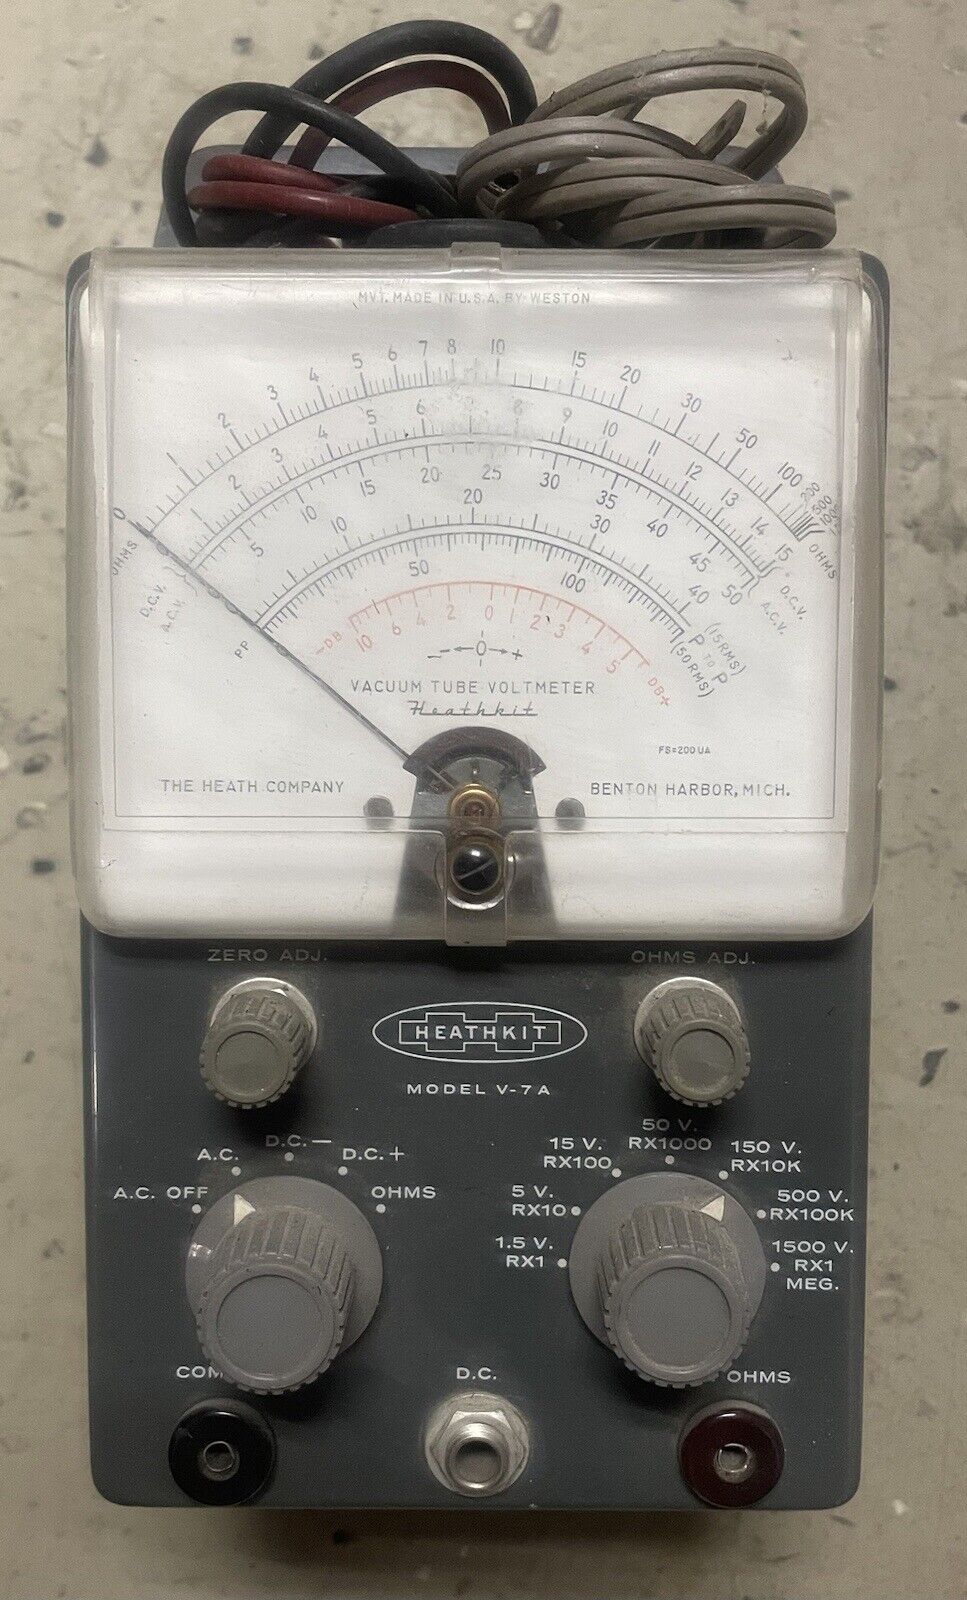 Vintage HEATHKIT Model V-7A Vacuum Tube Voltmeter, with Leads, Powers Up